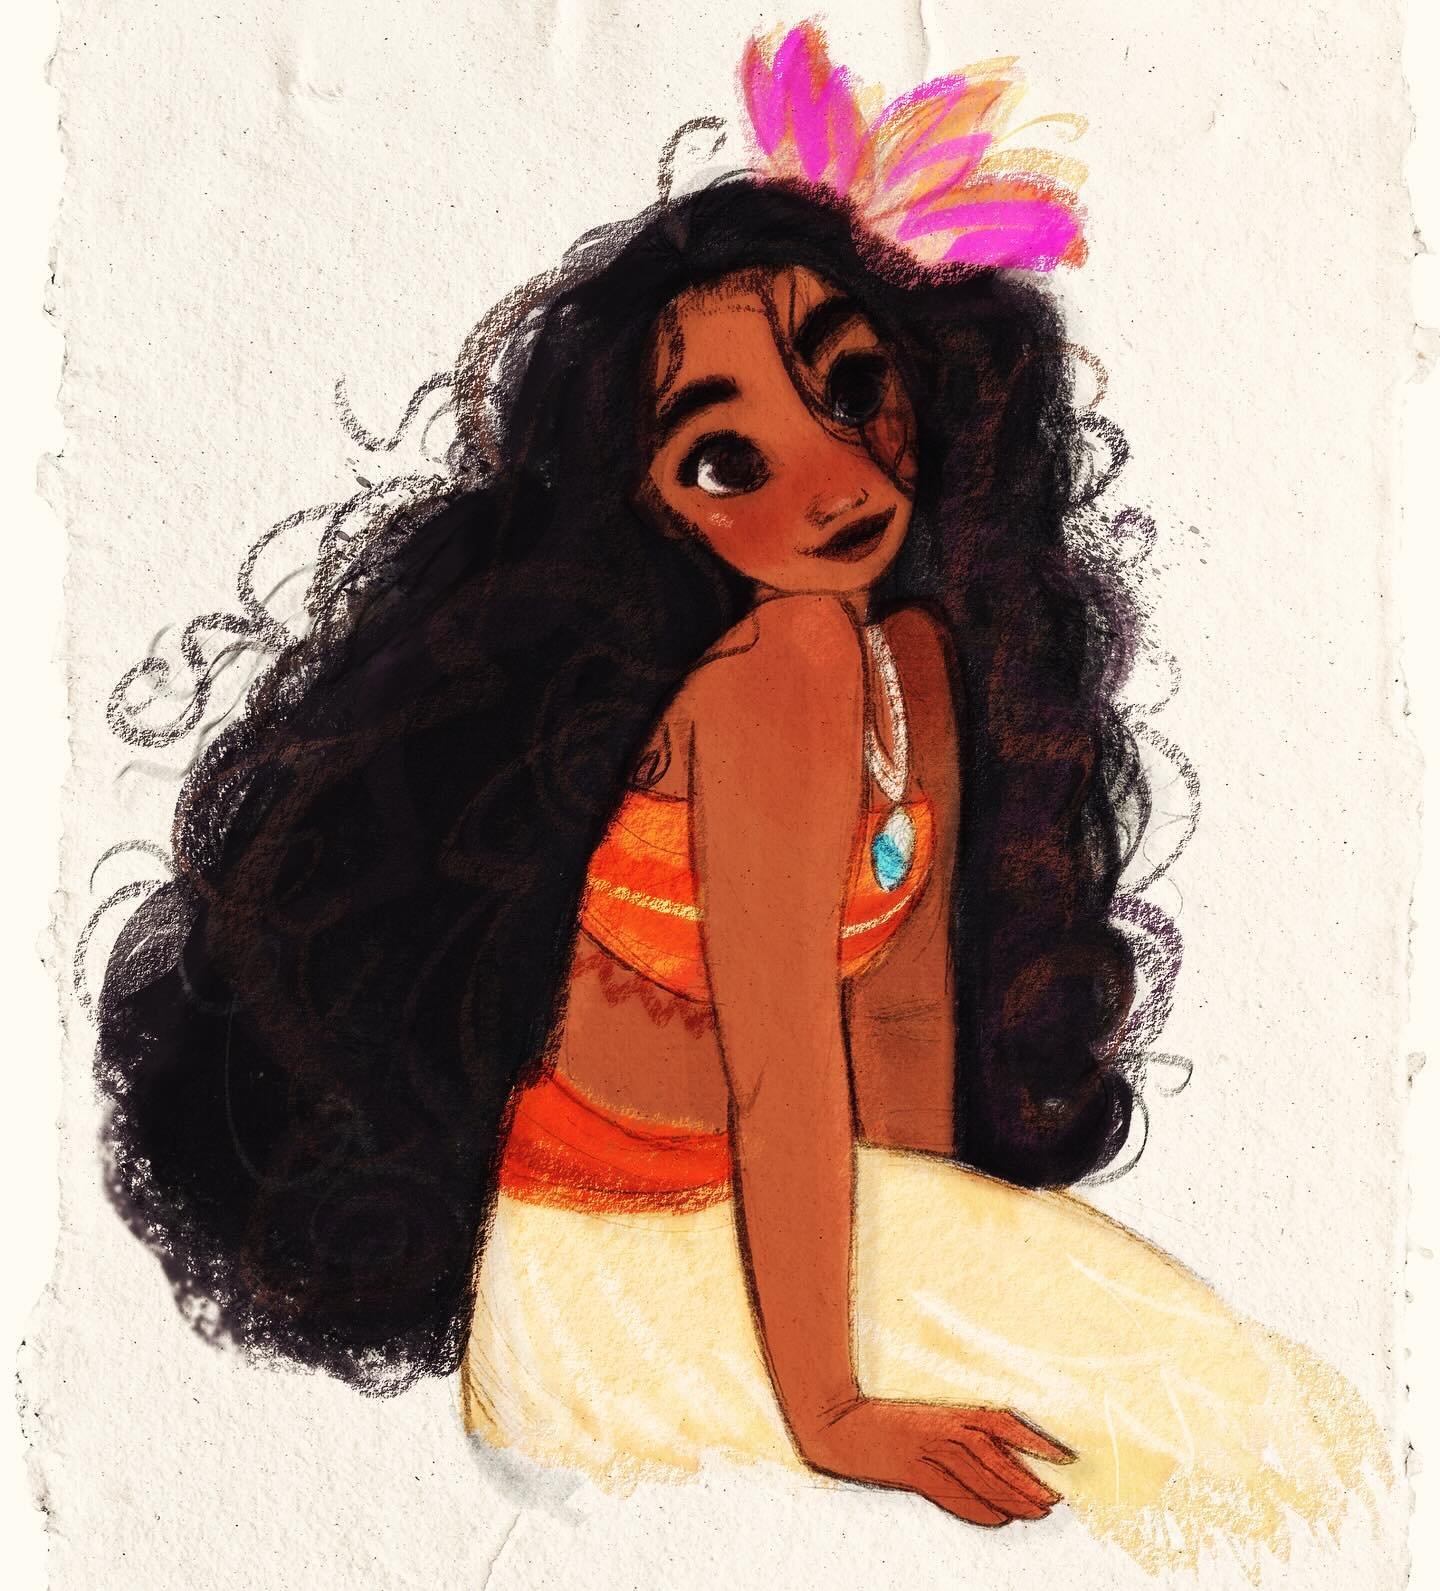 My favorite girl Moana for today! 🌺 

I retouched a forgotten sketch from all the way back to 2016 🌊

Can&rsquo;t wait to see what will happen in the new movie! 

Happy Wednesday! 🐚🌸
.
.
.
.
.
.
.
.
.
.
#moana #disneygirls #moanadisney #character